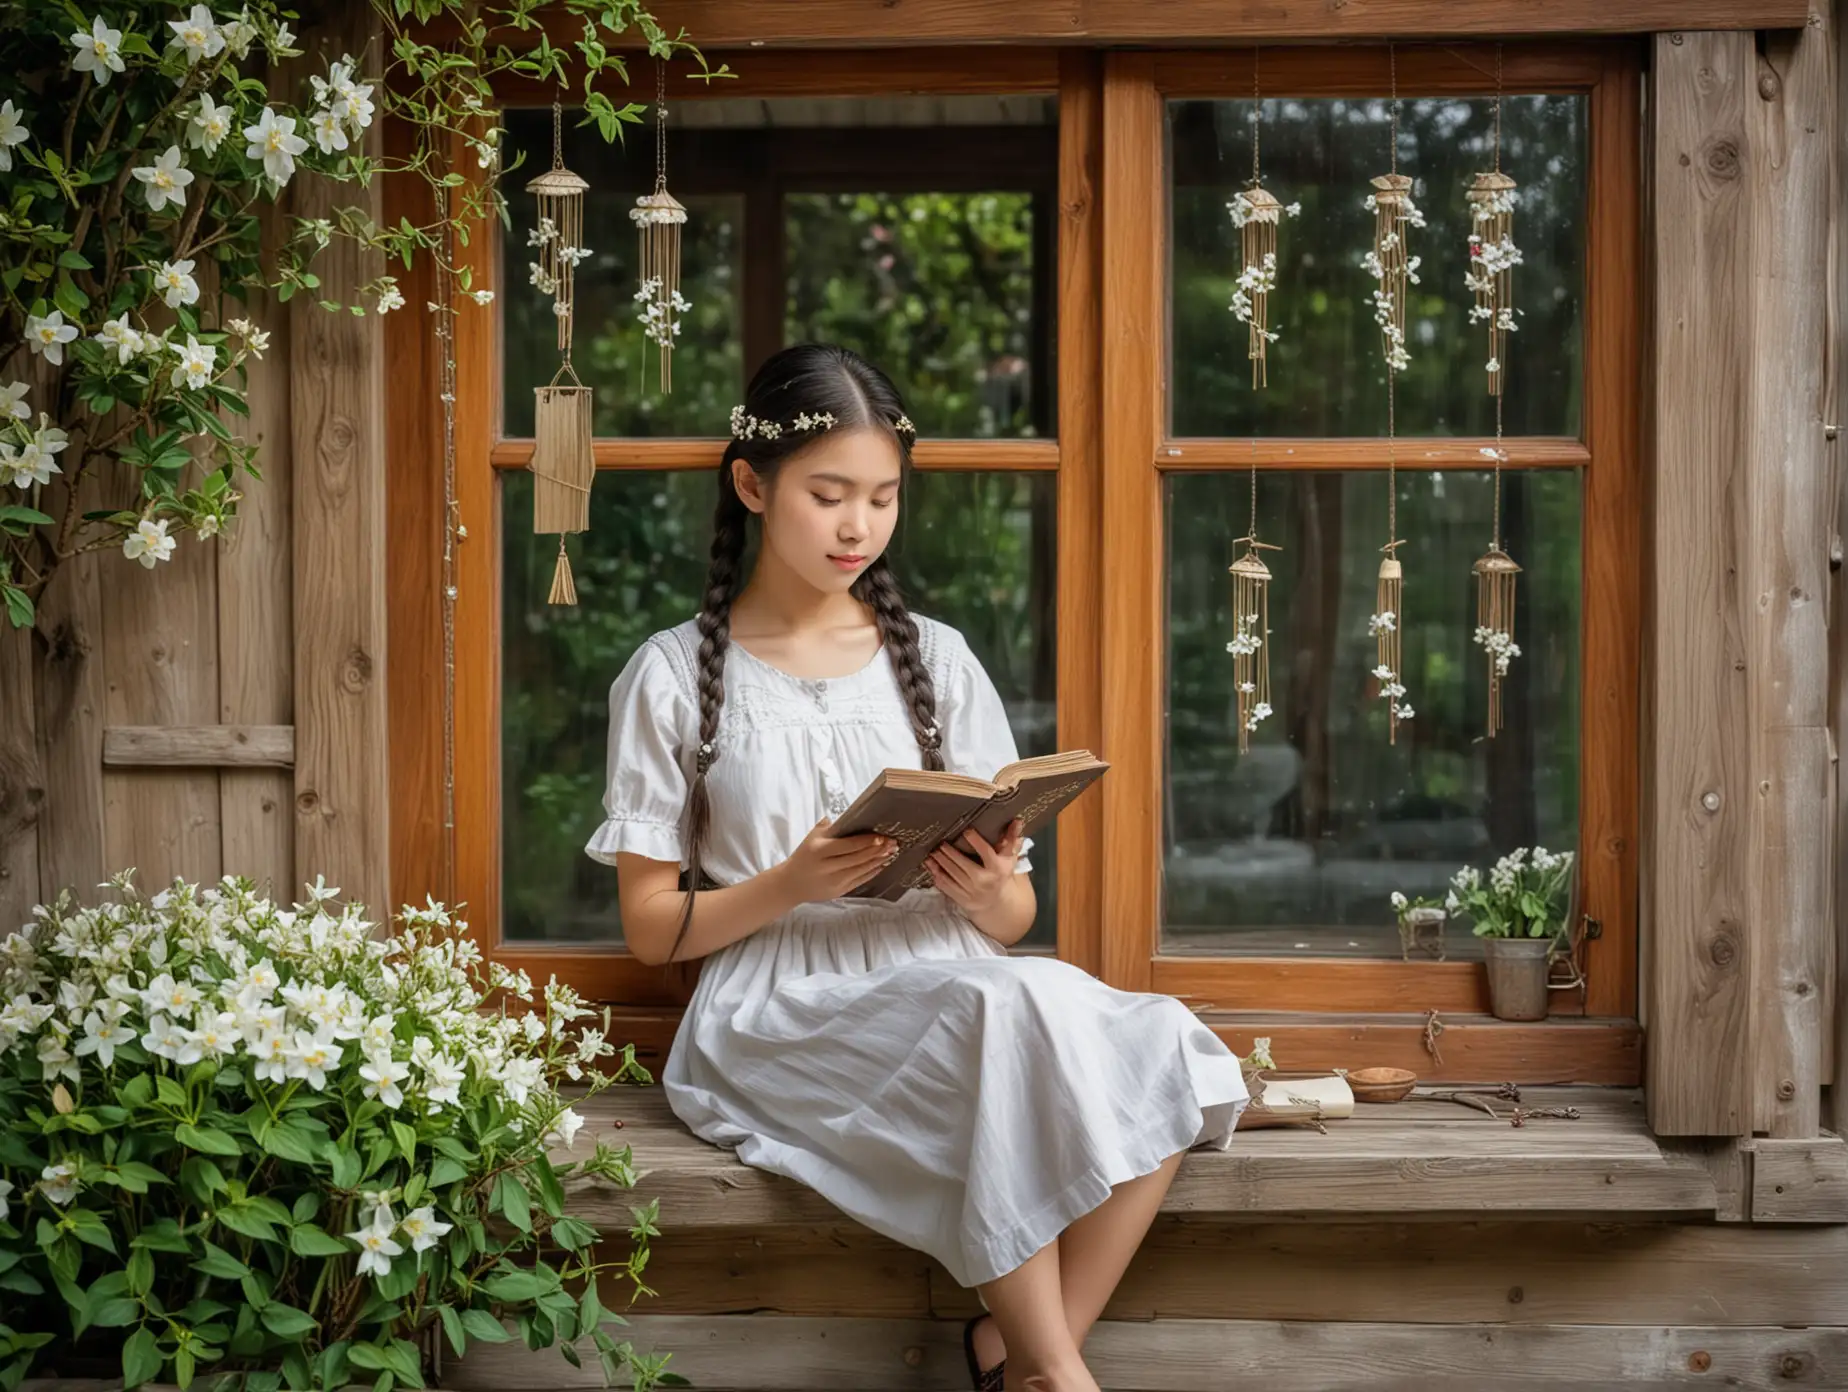 Asian-Girl-with-Braids-Reading-Book-by-Wooden-House-Window